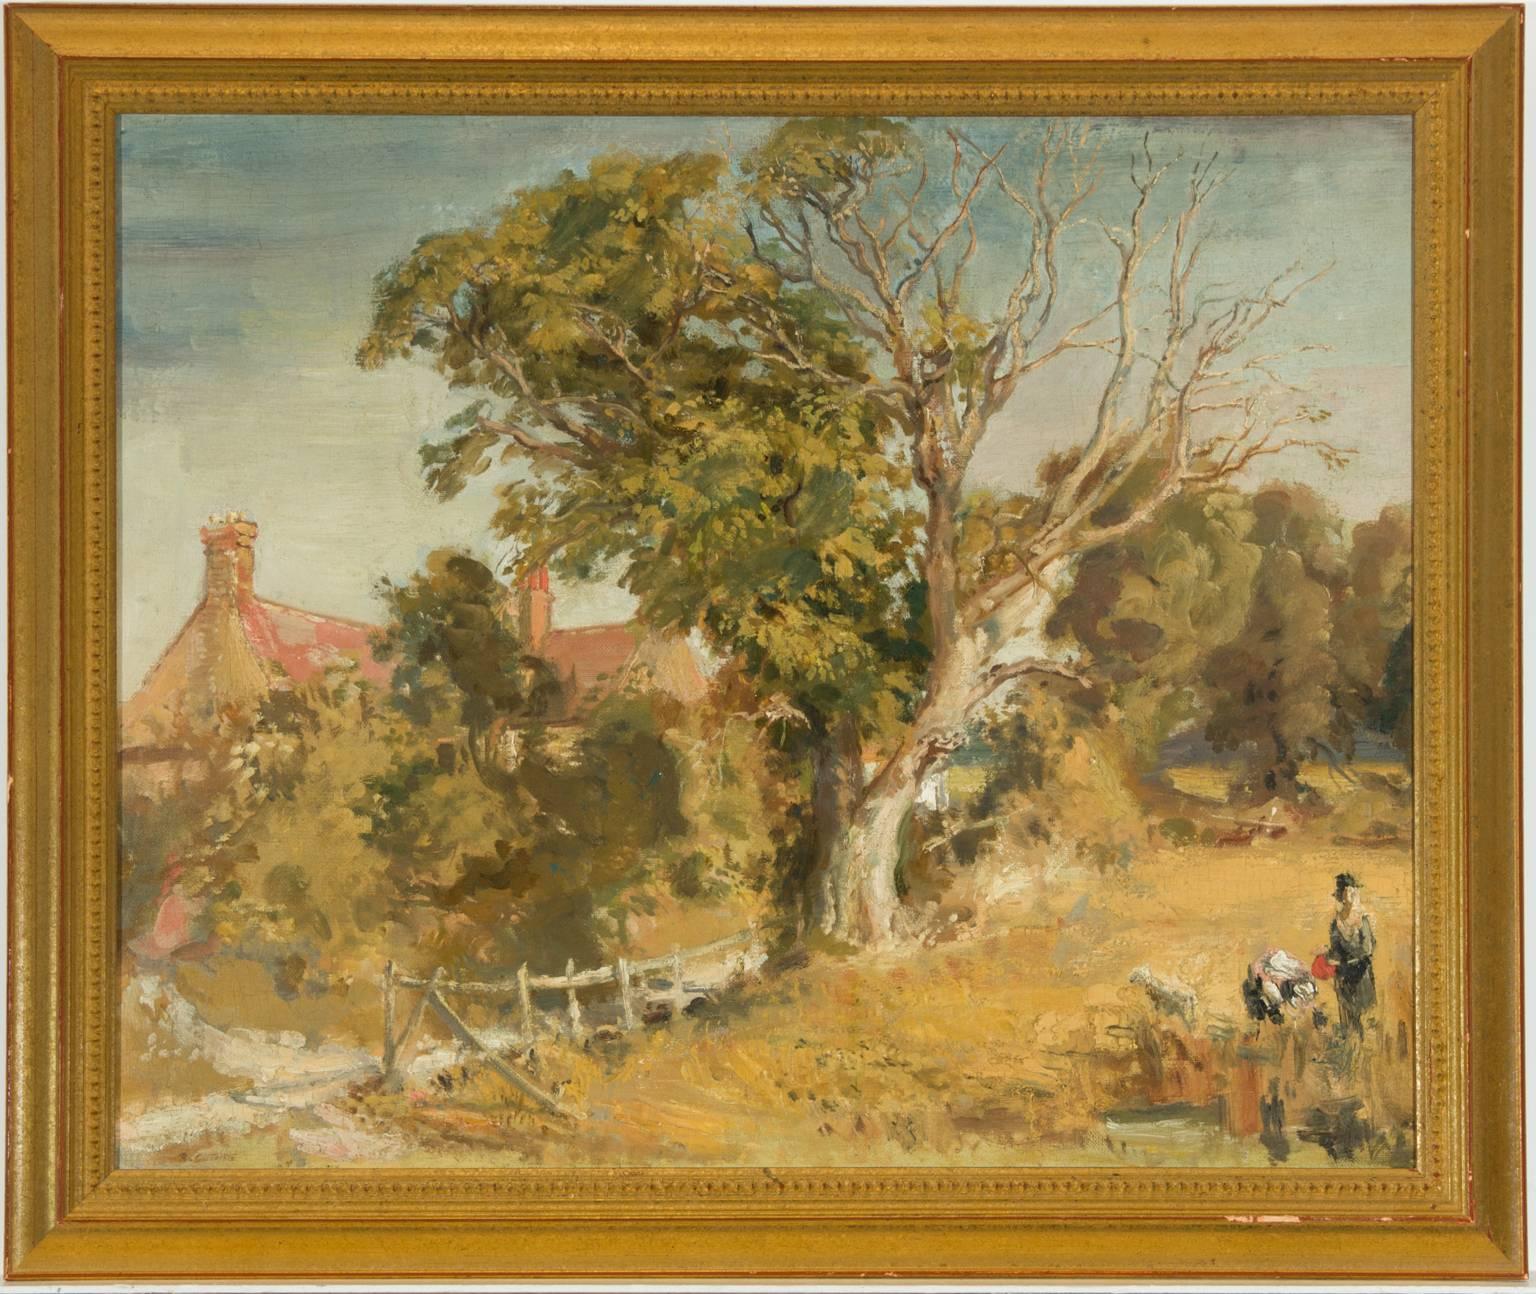 A charming 20th Century oil depicting an English rural landscape, with cottage and a dead tree beyond. This scene is highly typical of Robin Craig Guthrie (1902-1971), who often painted rural scenes. Presented in a decorative gilt frame with beaded